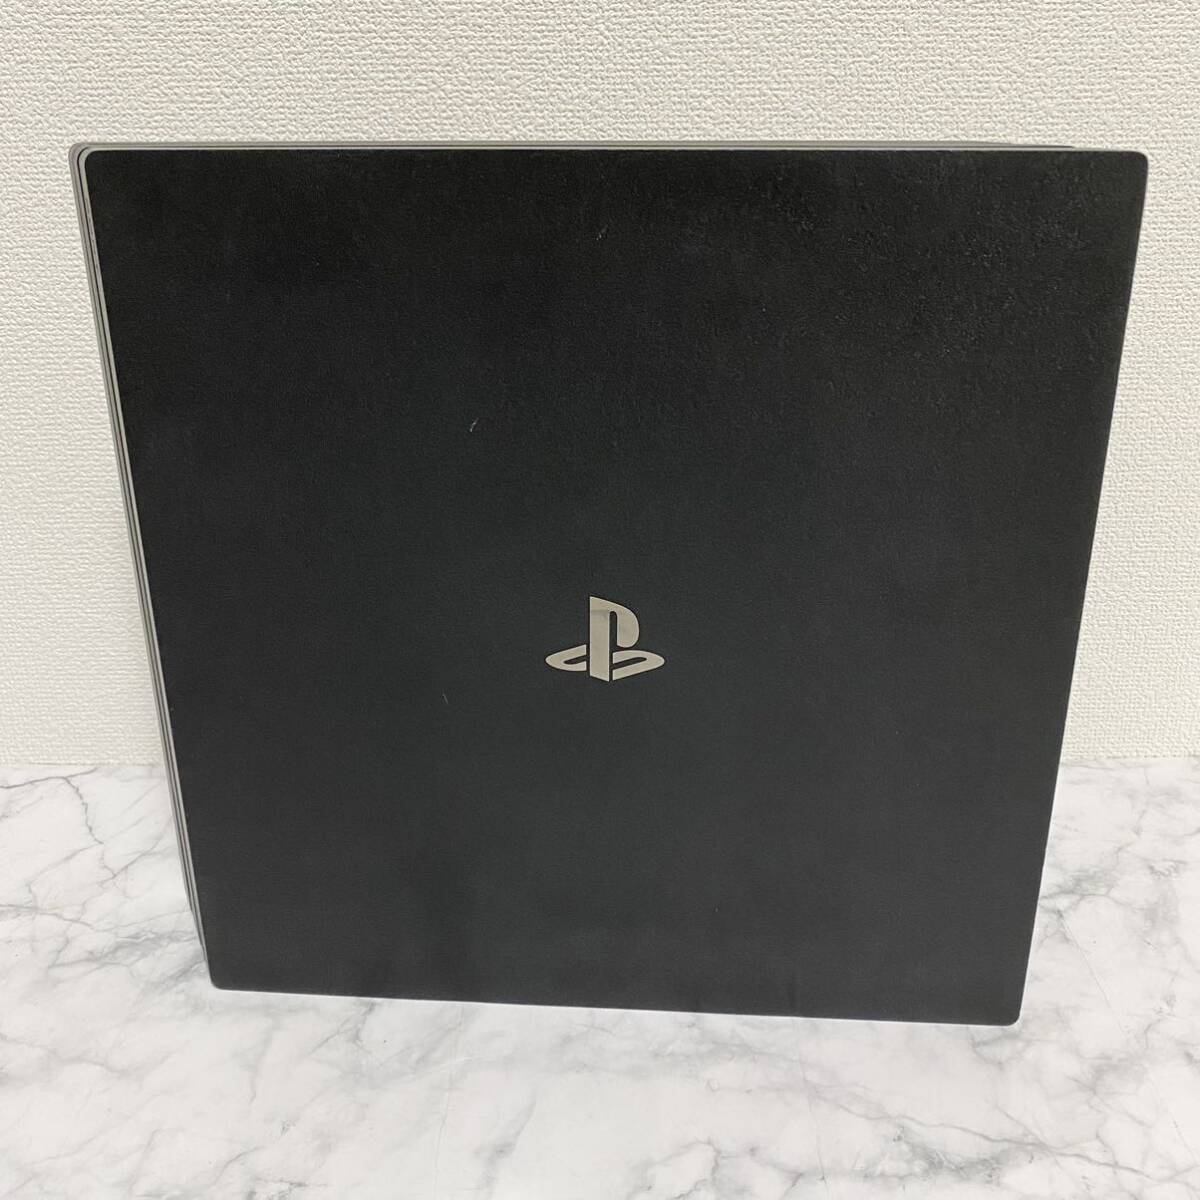 *FW11.00* SONY PS4 Pro CUH-7100B 1TB PlayStation 4 PlayStation4 jet black Sony the first period . ending 